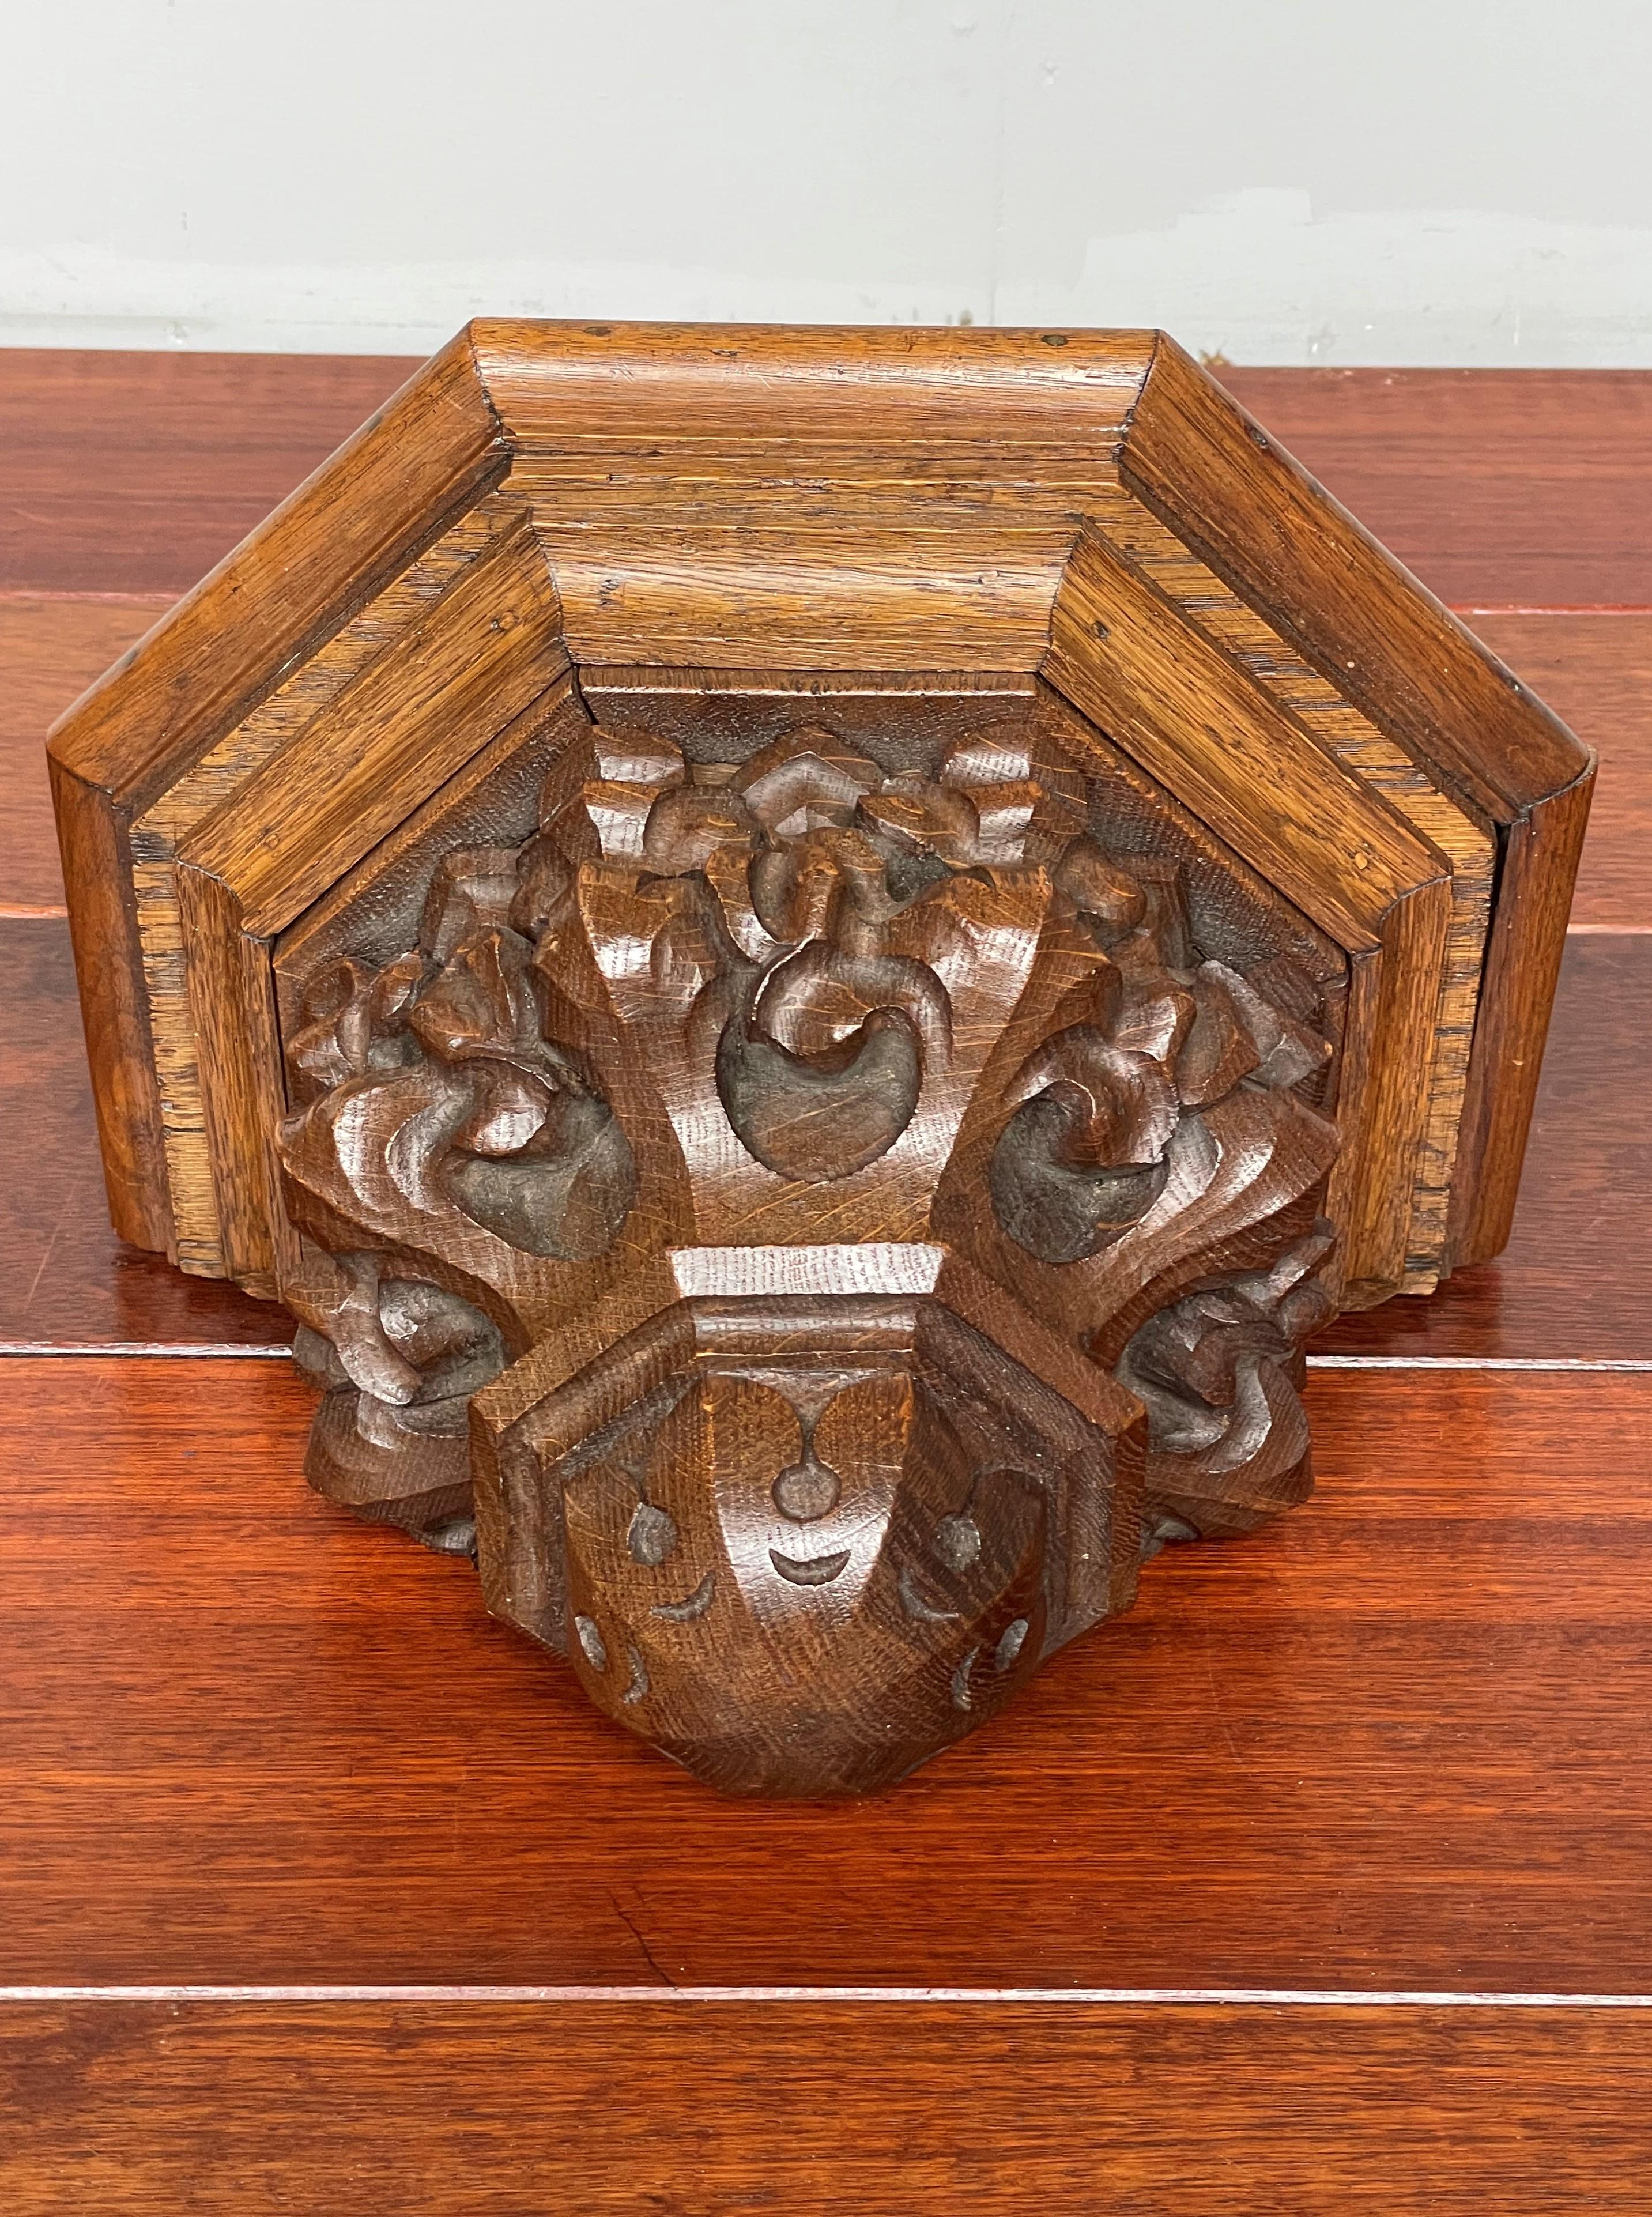 Wonderful and deeply carved Gothic Revival Bracket.

This all handcrafted, Gothic Revival wall bracket has the most wonderful shape and a striking patina. The organic shape and the natural flowing lines of the deeply carved Gothic leaves are an